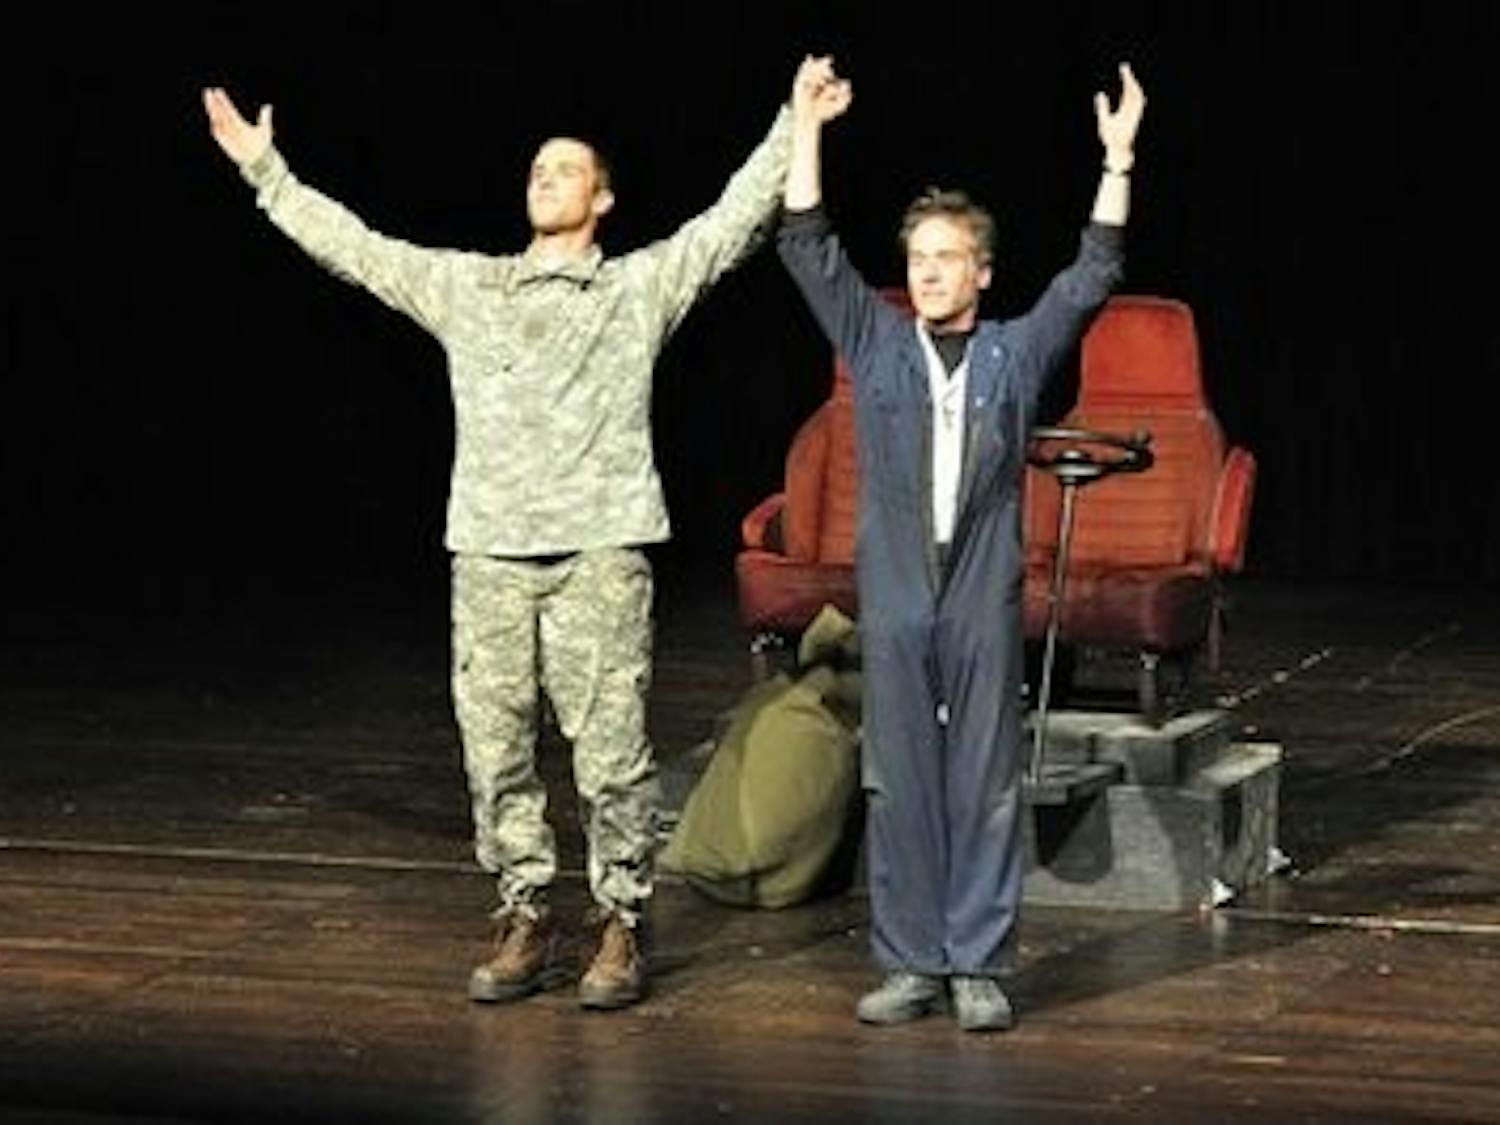 Eric Holzschuh and Kevin Bennett are applauded after their performance in "Six Dead Bodies" at Triple Crown Theater in New York. (CONTRIBUTED)